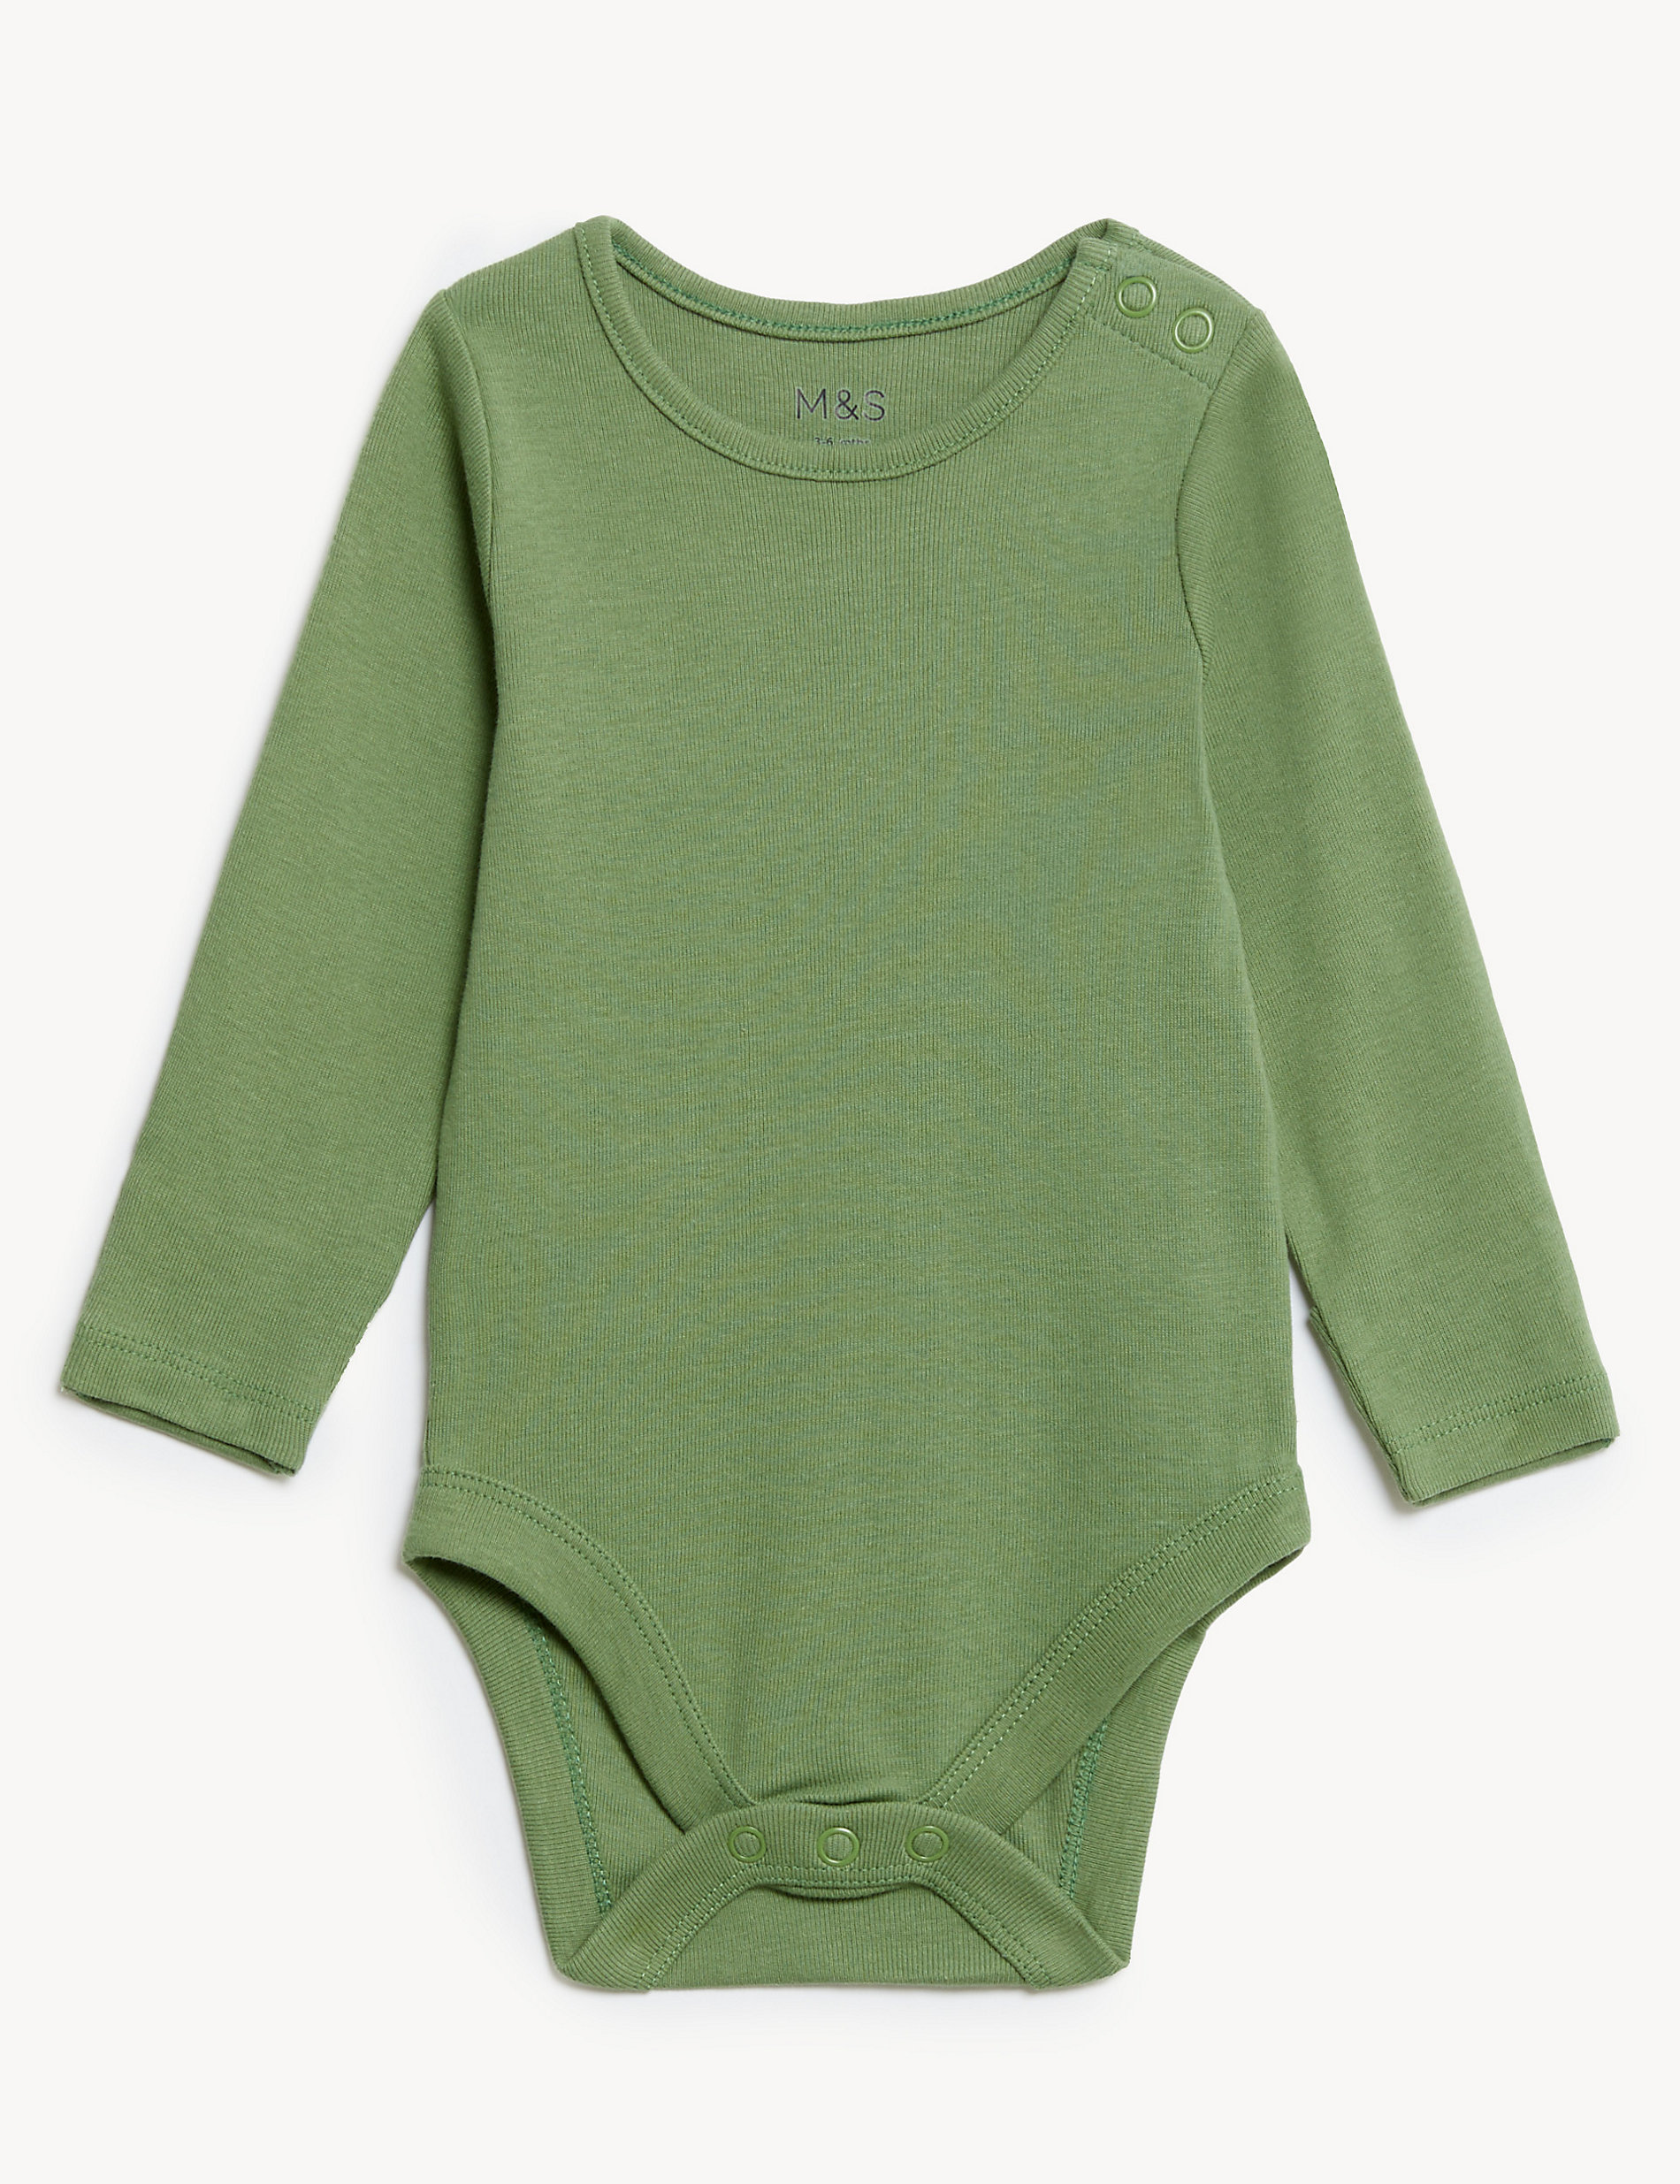 2pc Pure Cotton Dinosaur Outfit (0-3 Yrs)